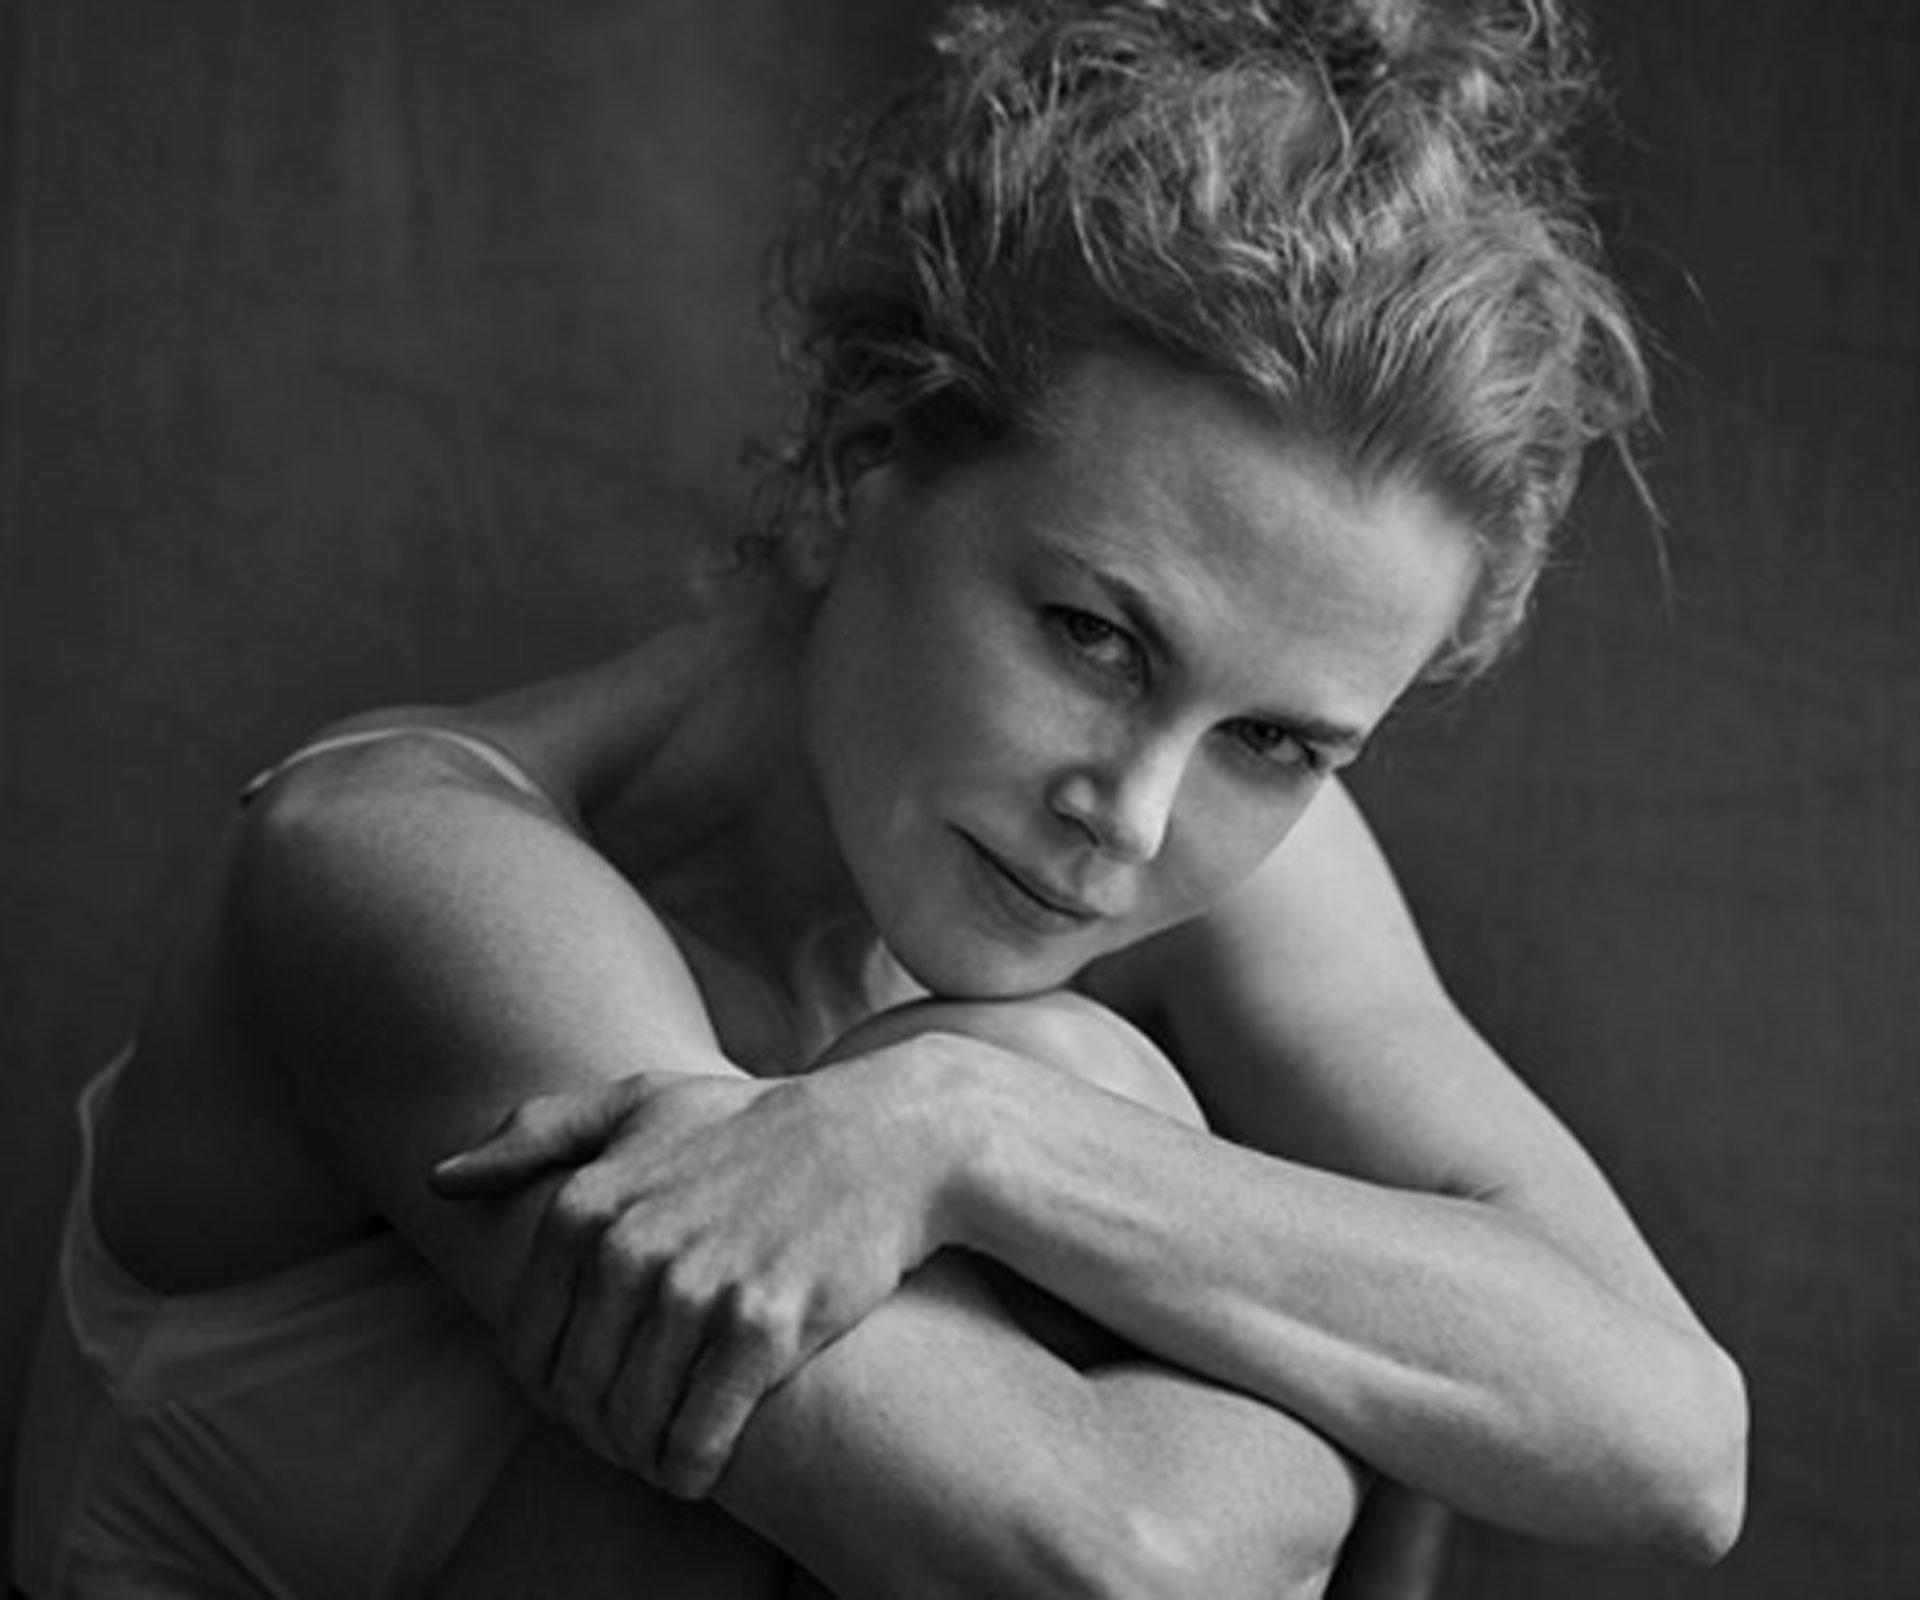 “It’s another kind of naked”: Actresses star in a raw and revealing 2017 Pirelli calendar